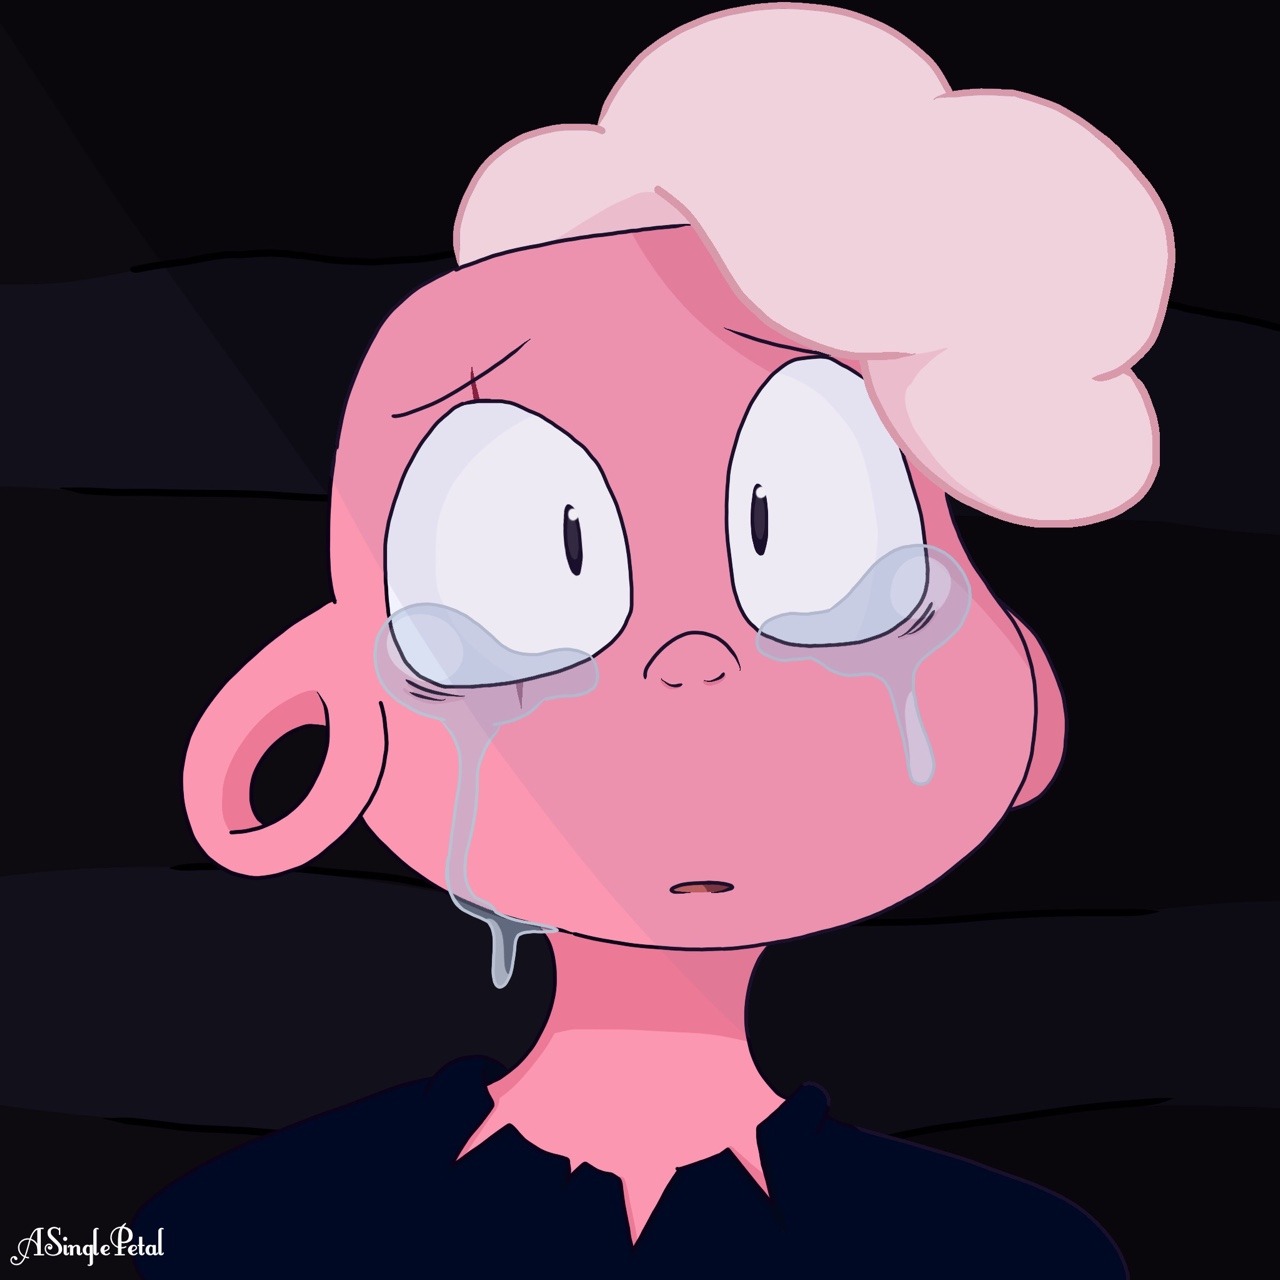 👏I want pink boy Lars to go home!! 👏 Get the boy home! 👏